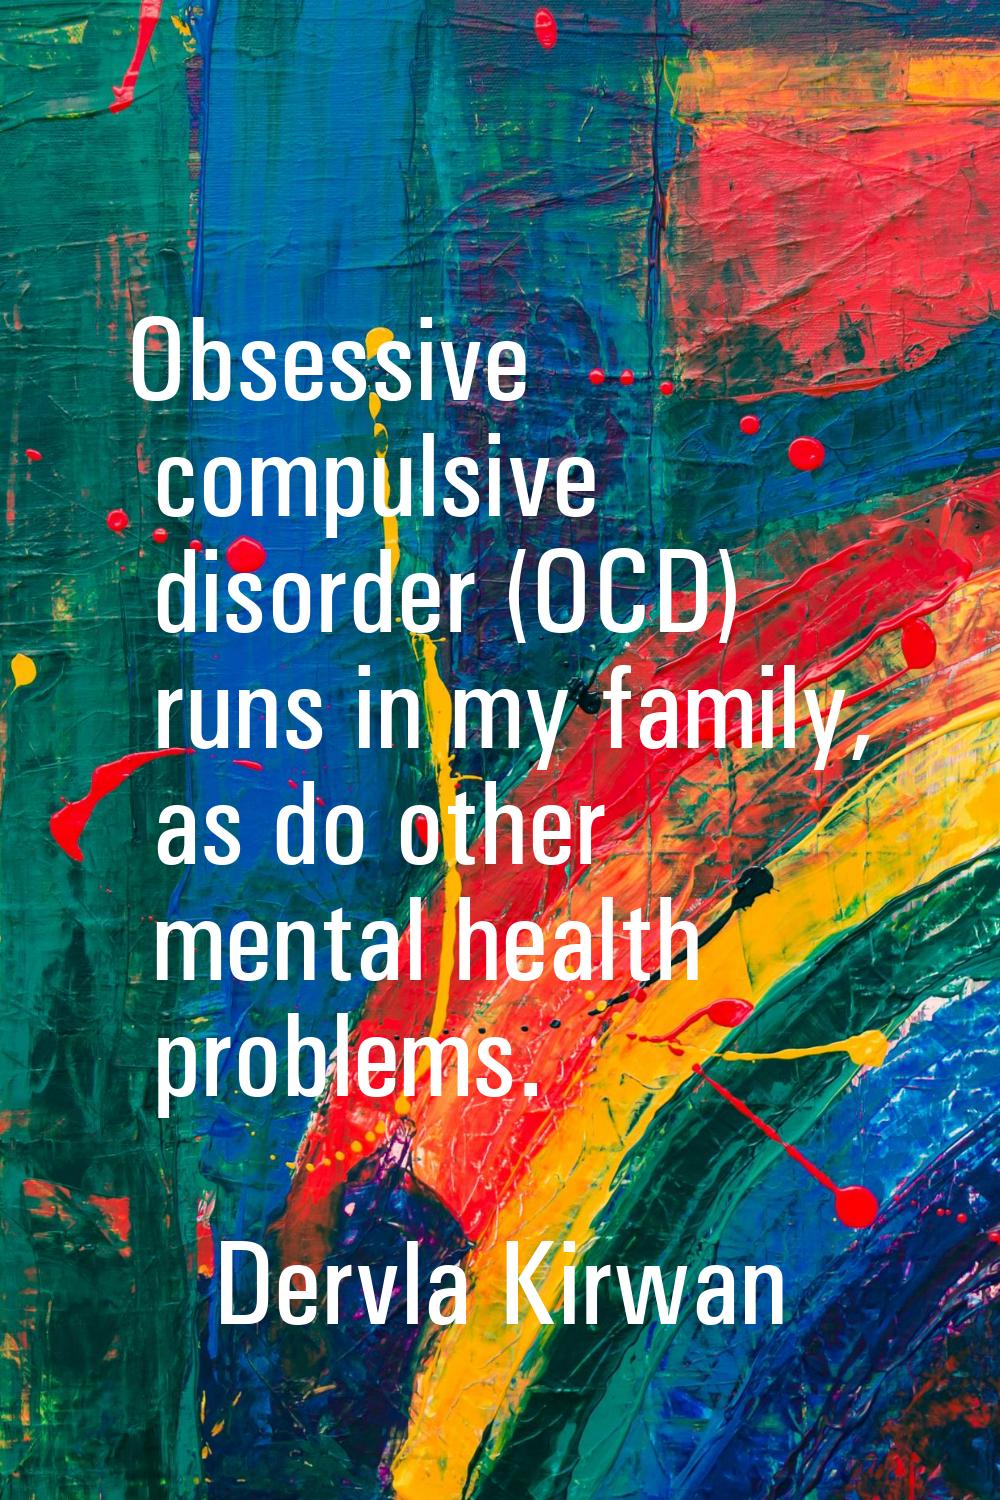 Obsessive compulsive disorder (OCD) runs in my family, as do other mental health problems.